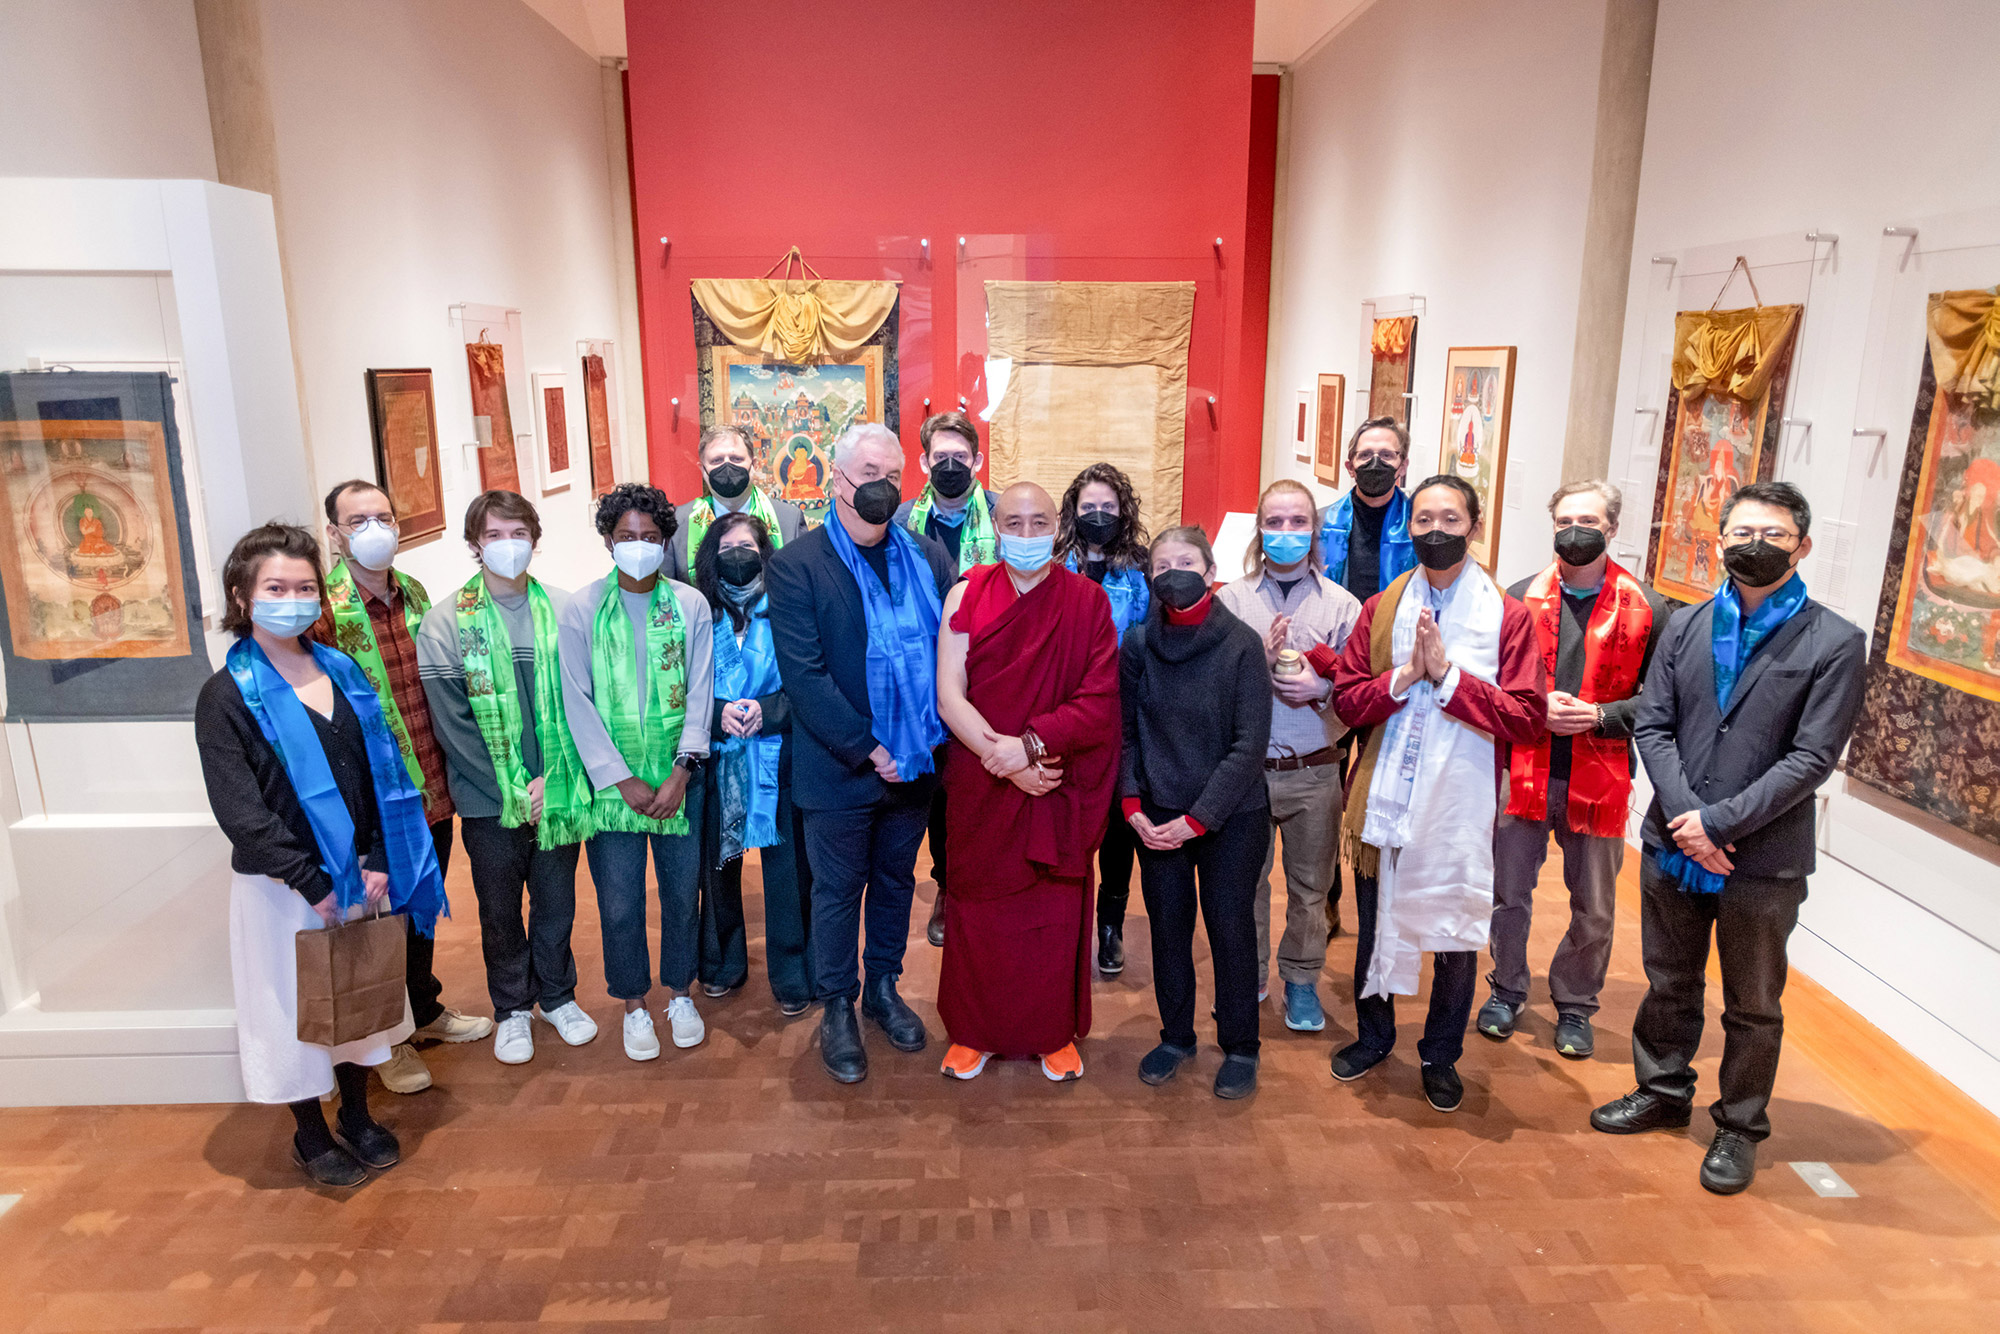 More than a dozen Vassar students and faculty and staff of the Frances Lehman Loeb Art Center attended the ceremony with donor Jack Shear and Lama Tashi Topgyal.